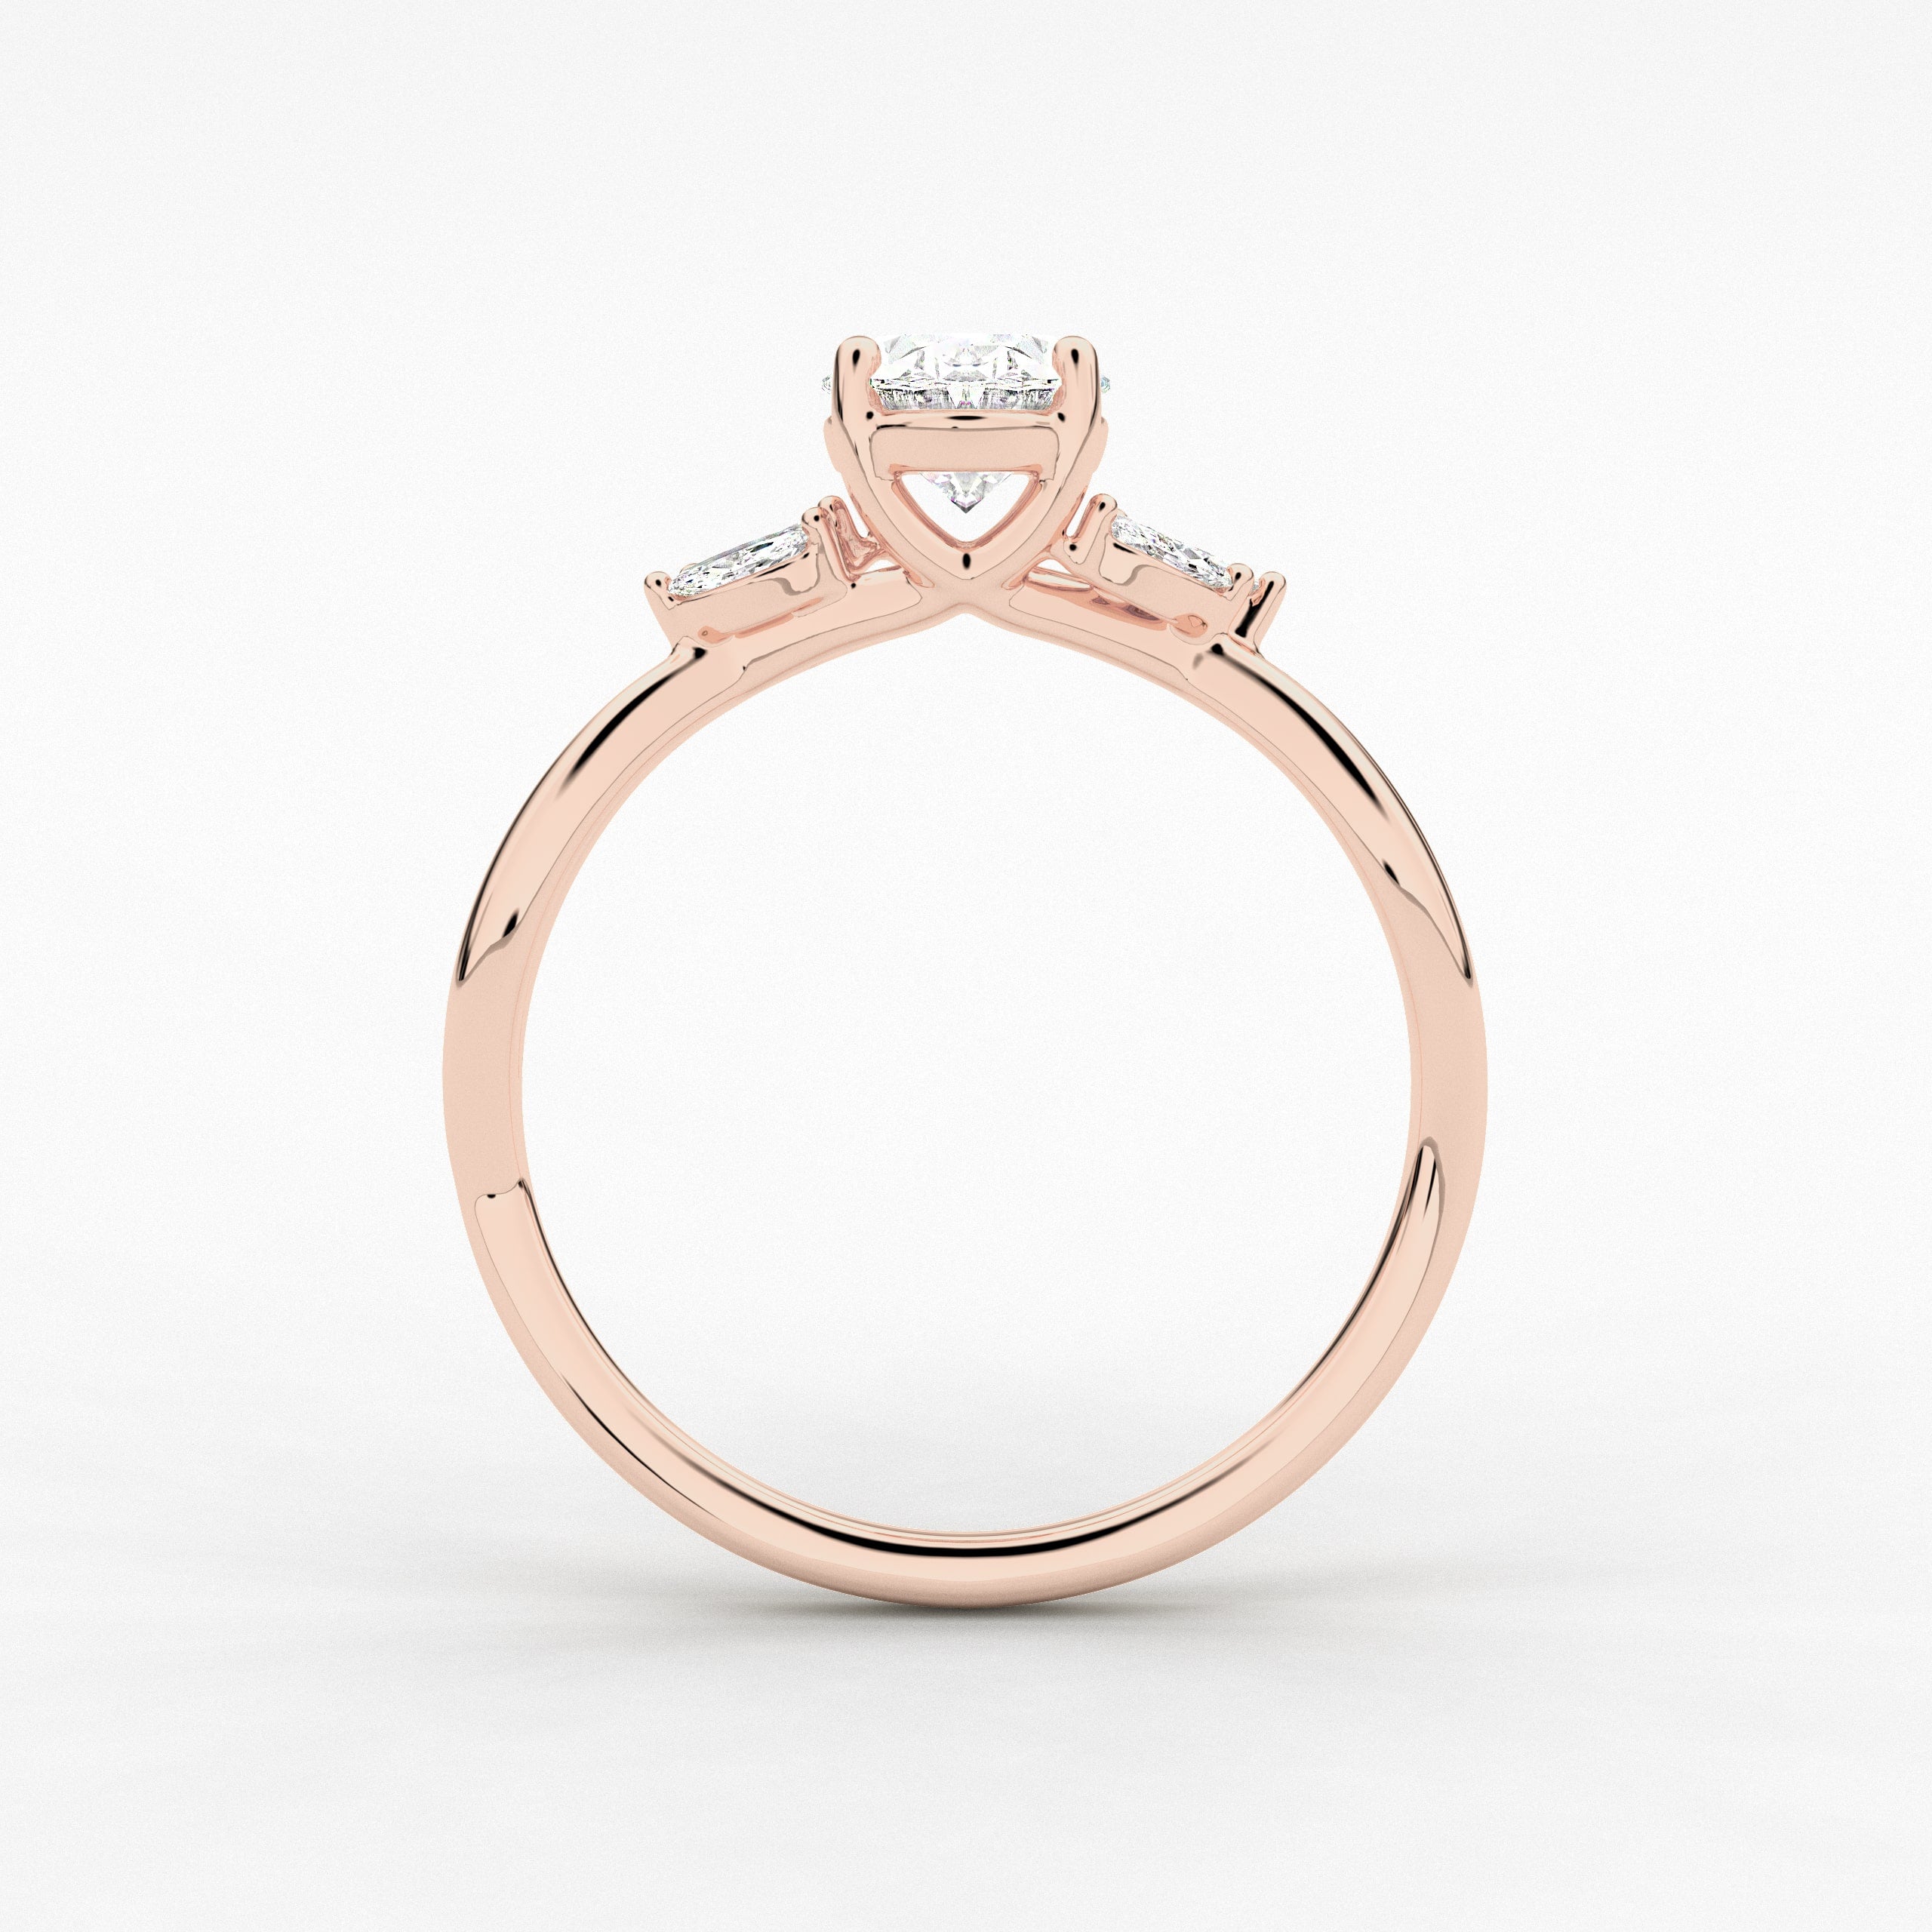 Oval Cut Nature Inspired Diamond In Marquise Cut Engagement Ring In Rose Gold 